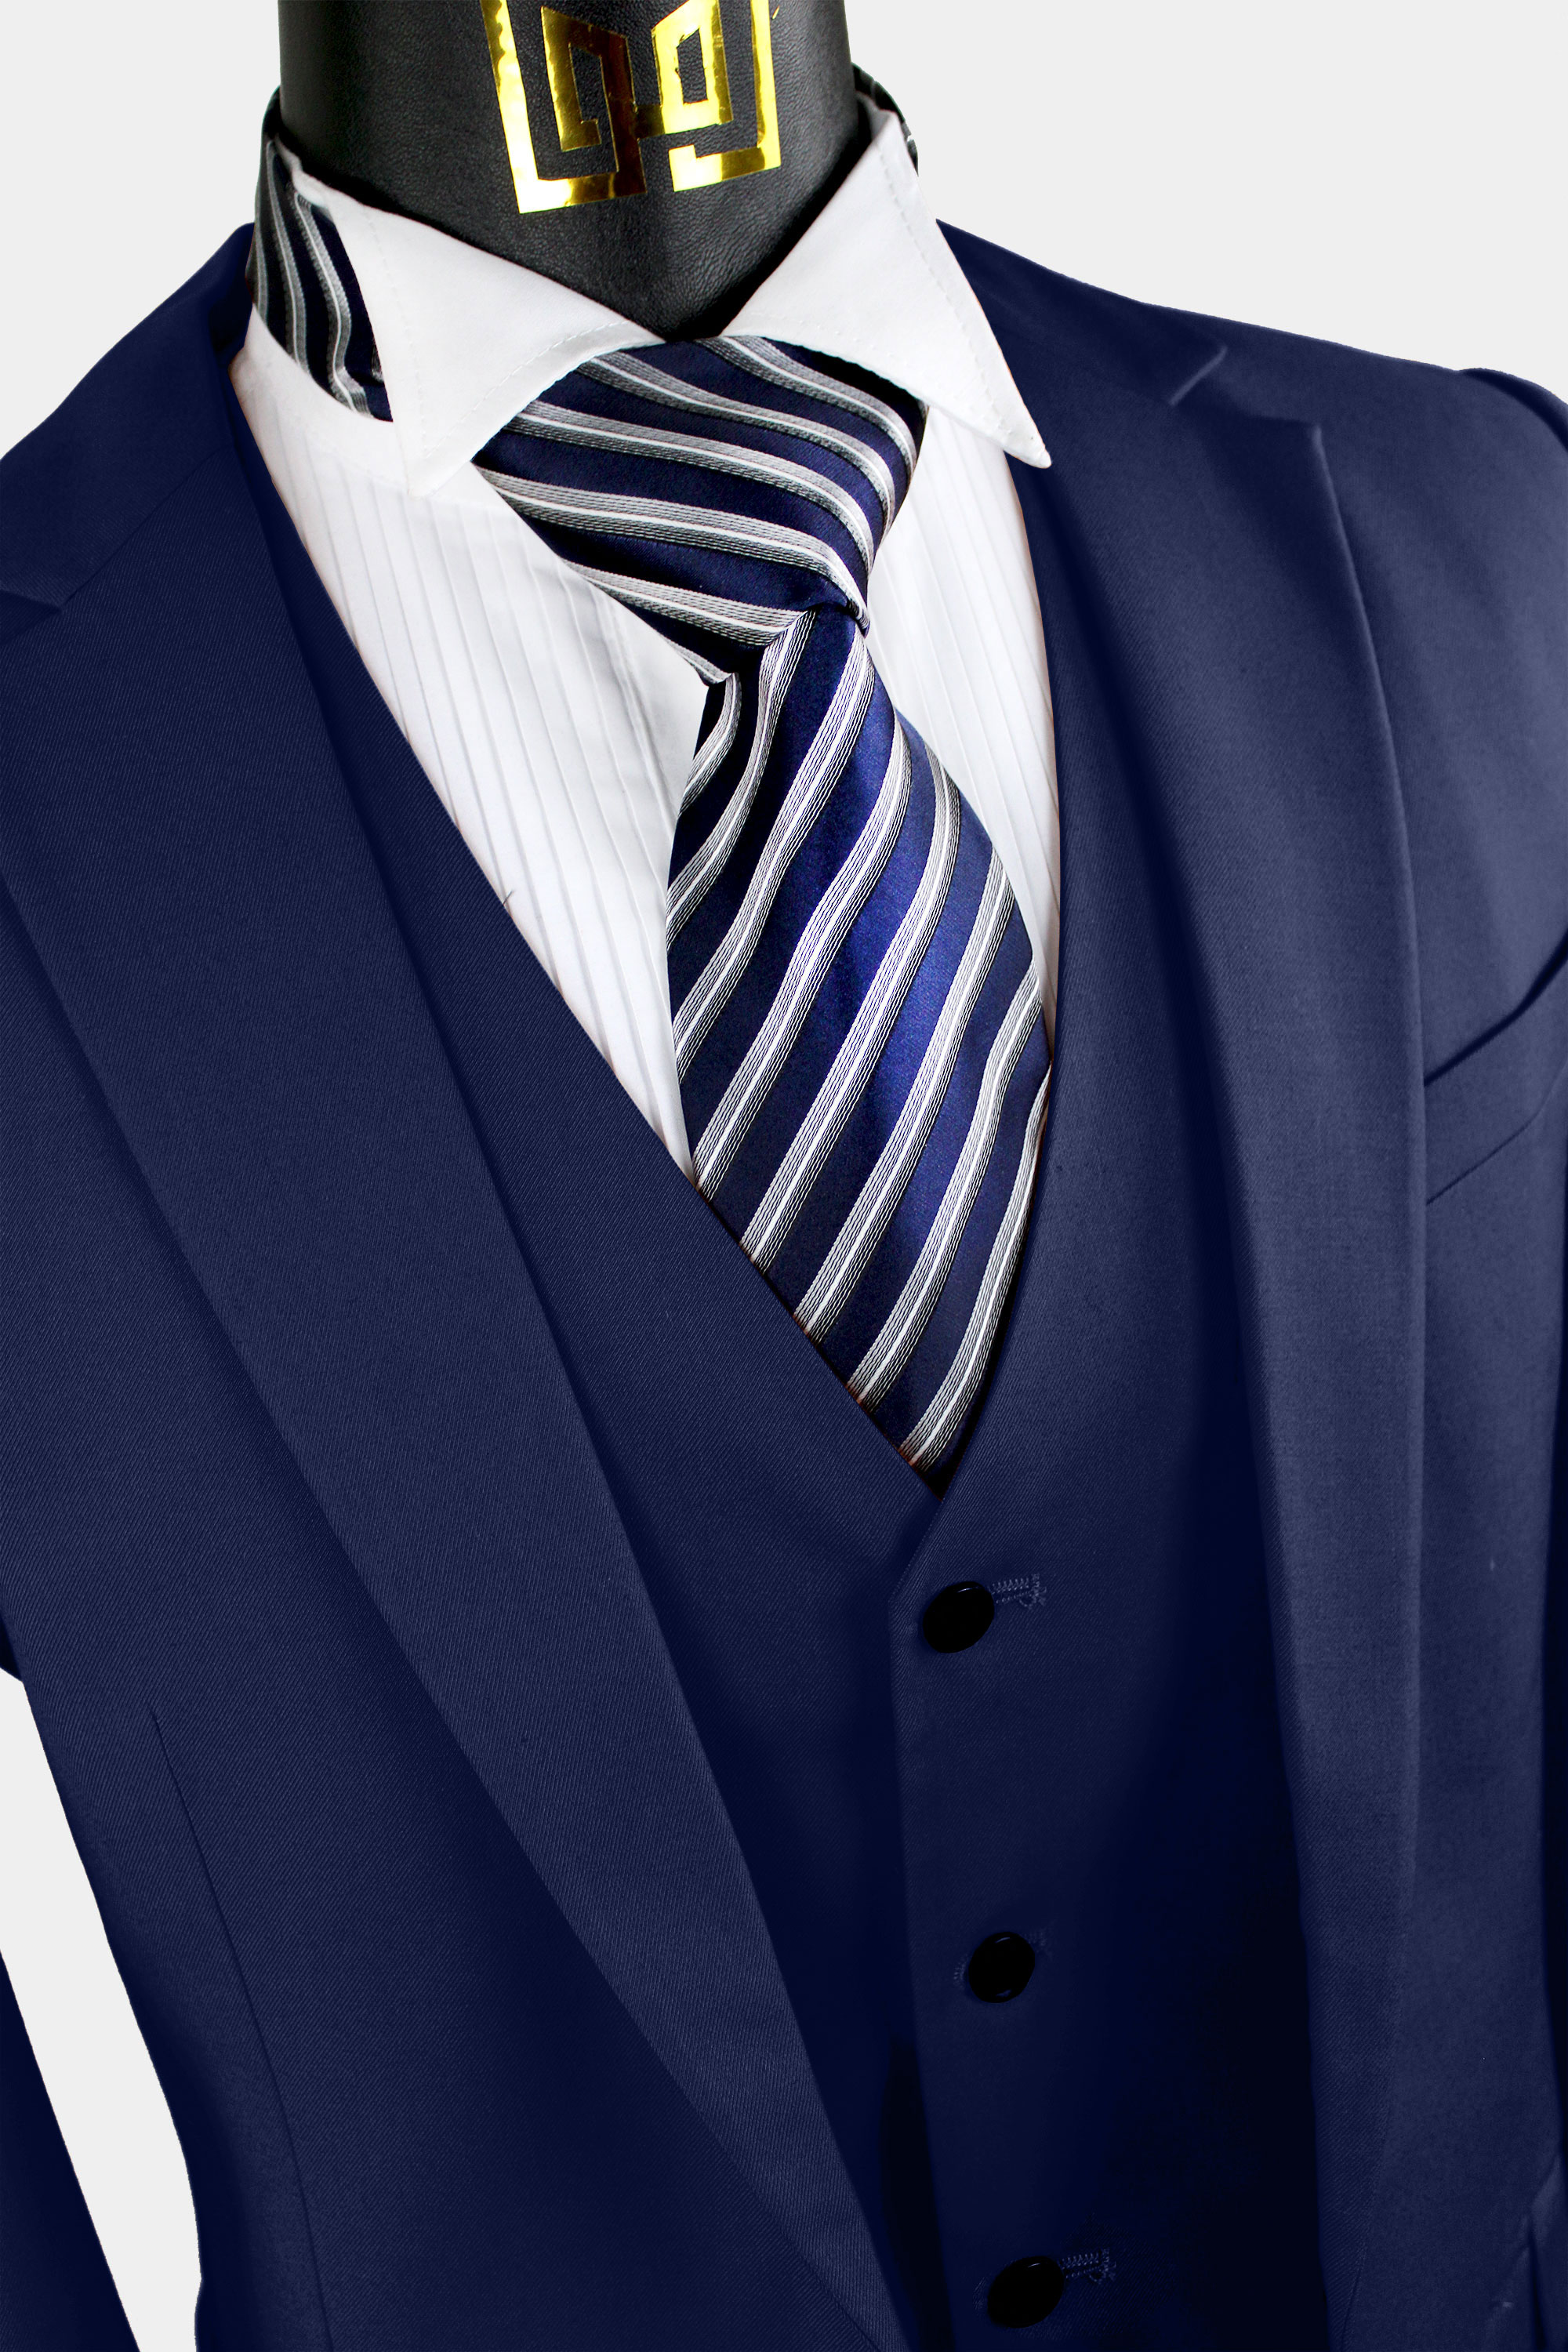 Buy Navy Blue Three-piece Suit for Men Formal Event Attire for